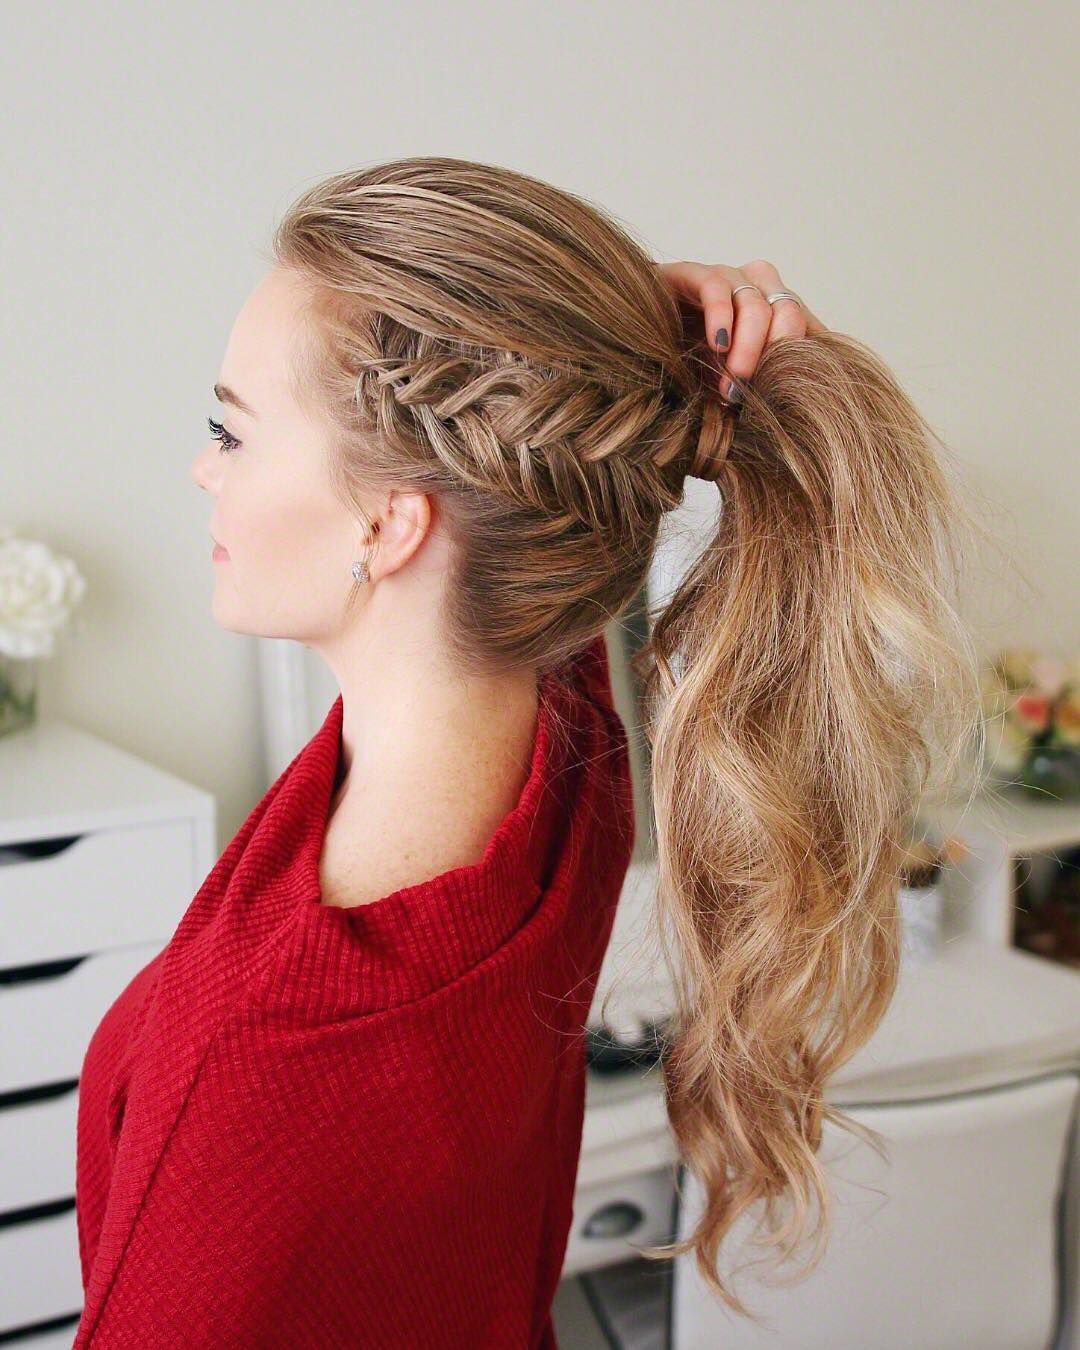 Best Super Cute and Cool Ponytail Hairstyles, Long Hair Styles Ideas